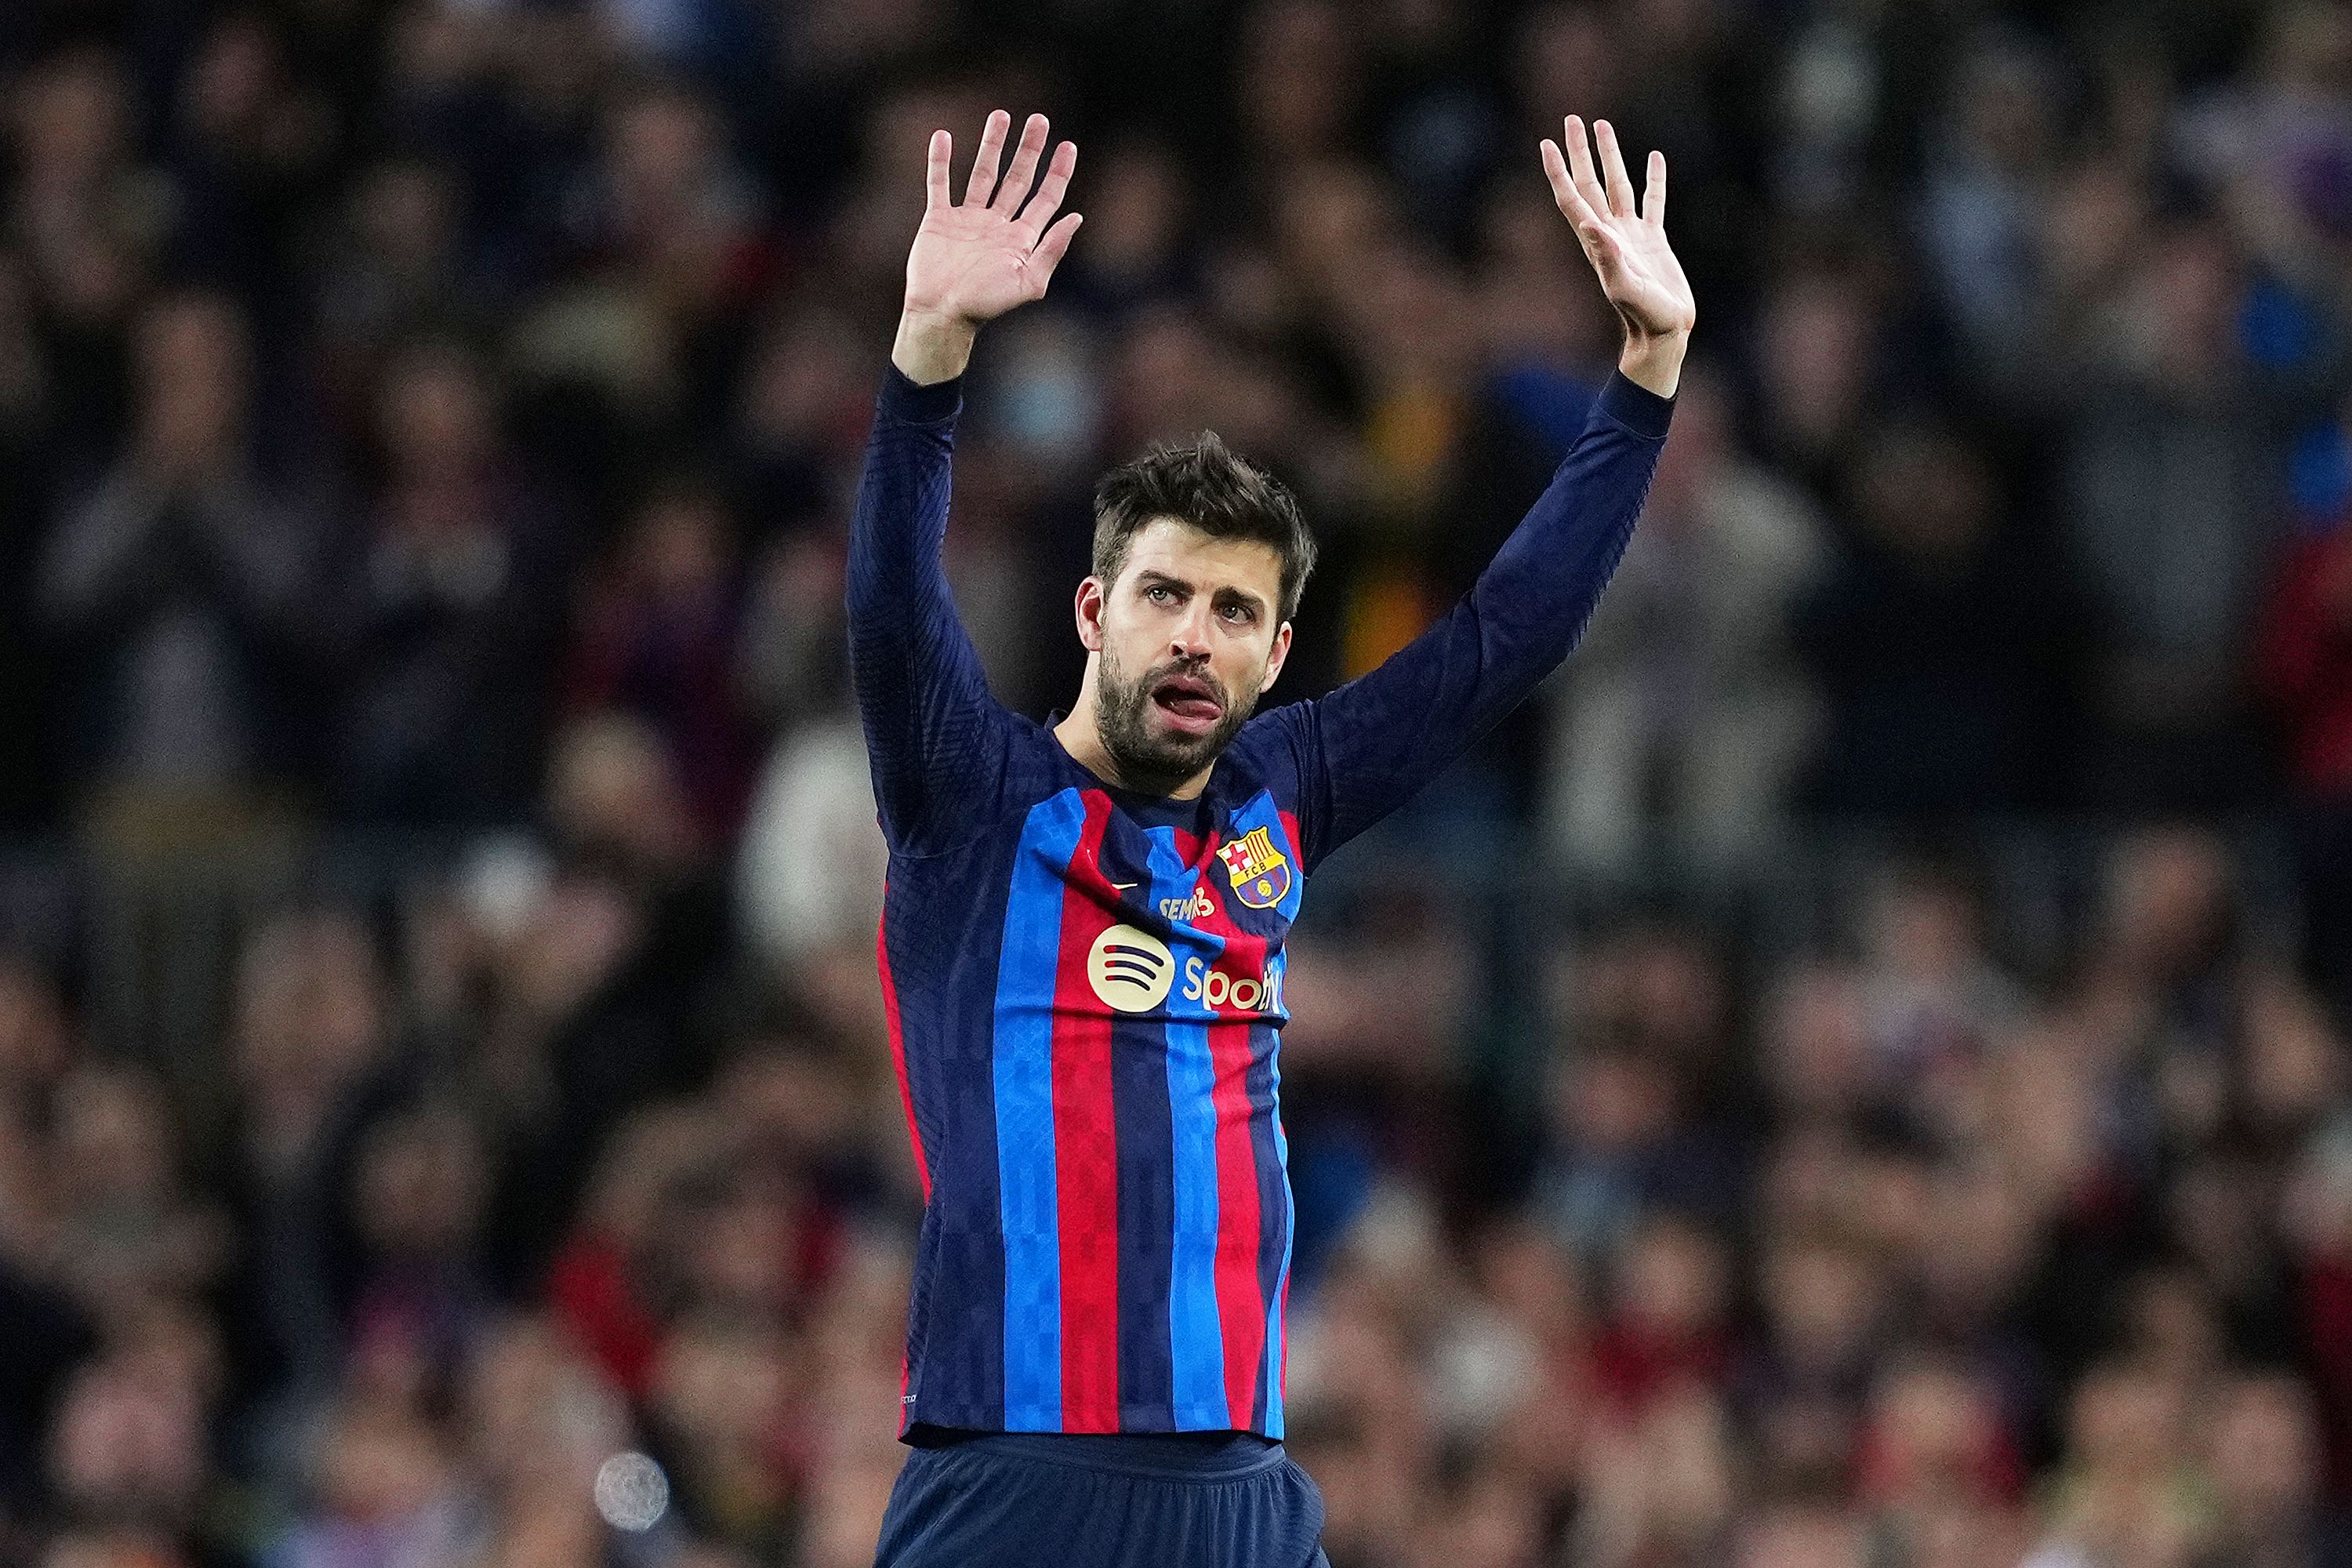 Emotional scenes as Gerard Pique bows out of football after final Barcelona appearance